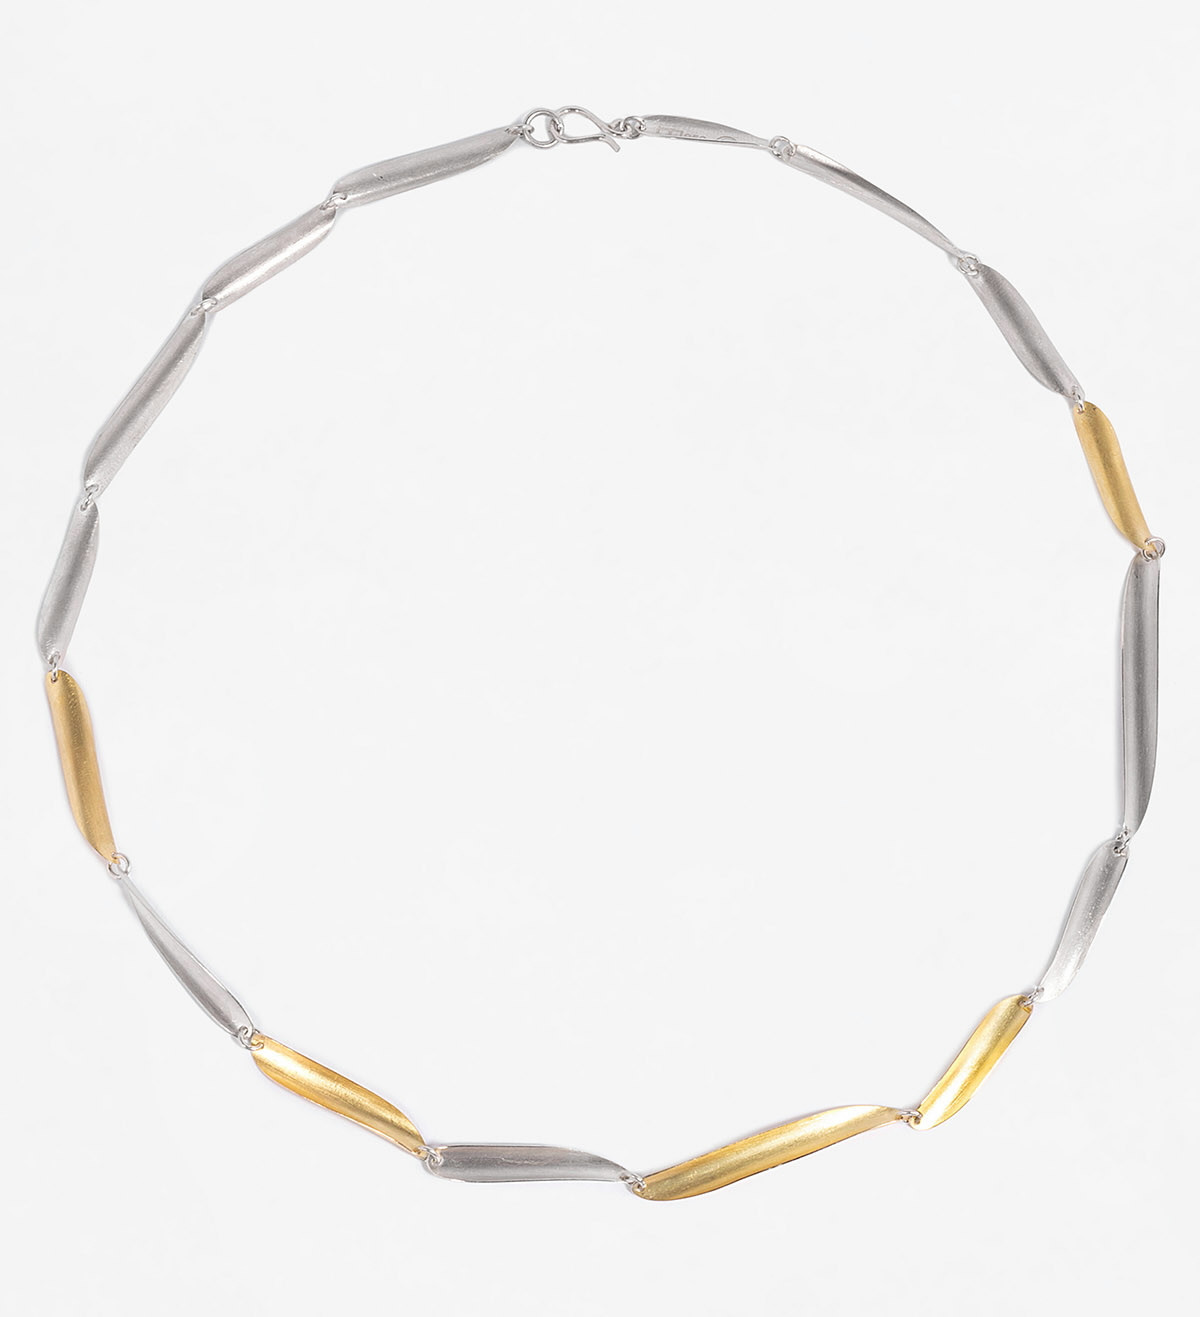 Volta silver and gold necklace 43cm